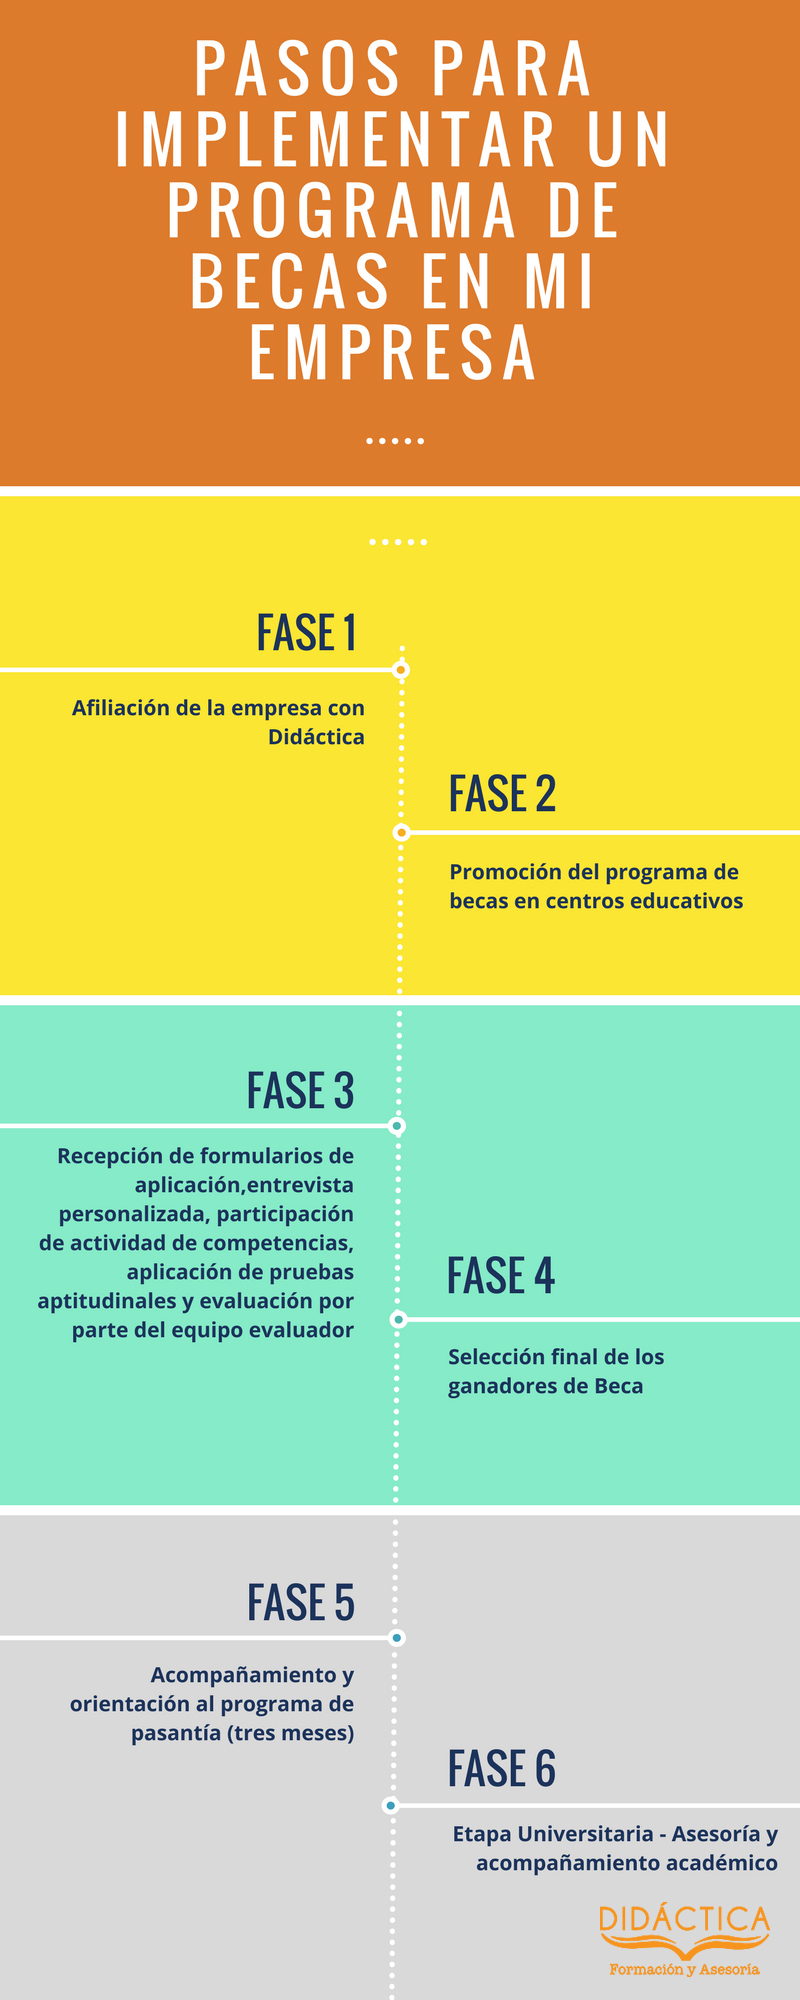 test - An Infographic from Didáctica S.R.L.